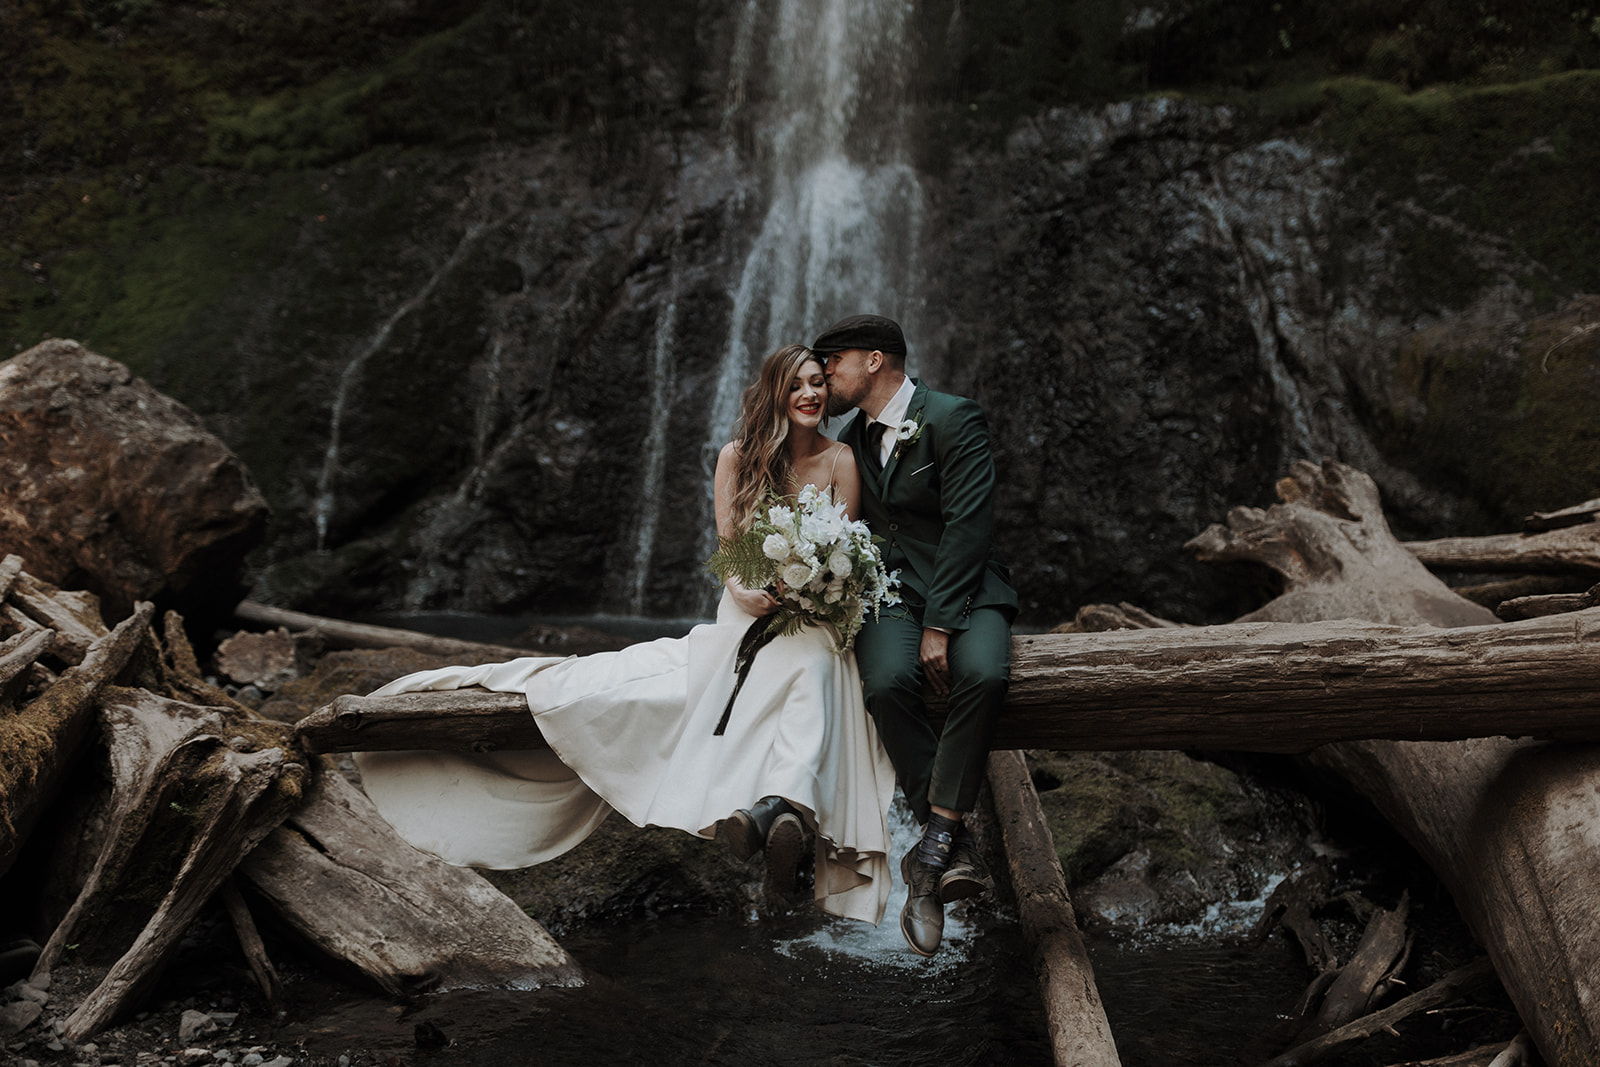 A wedding couple with the groom in a green suit sitting on a log at Marymere Falls in Washington in Olympic National Park.